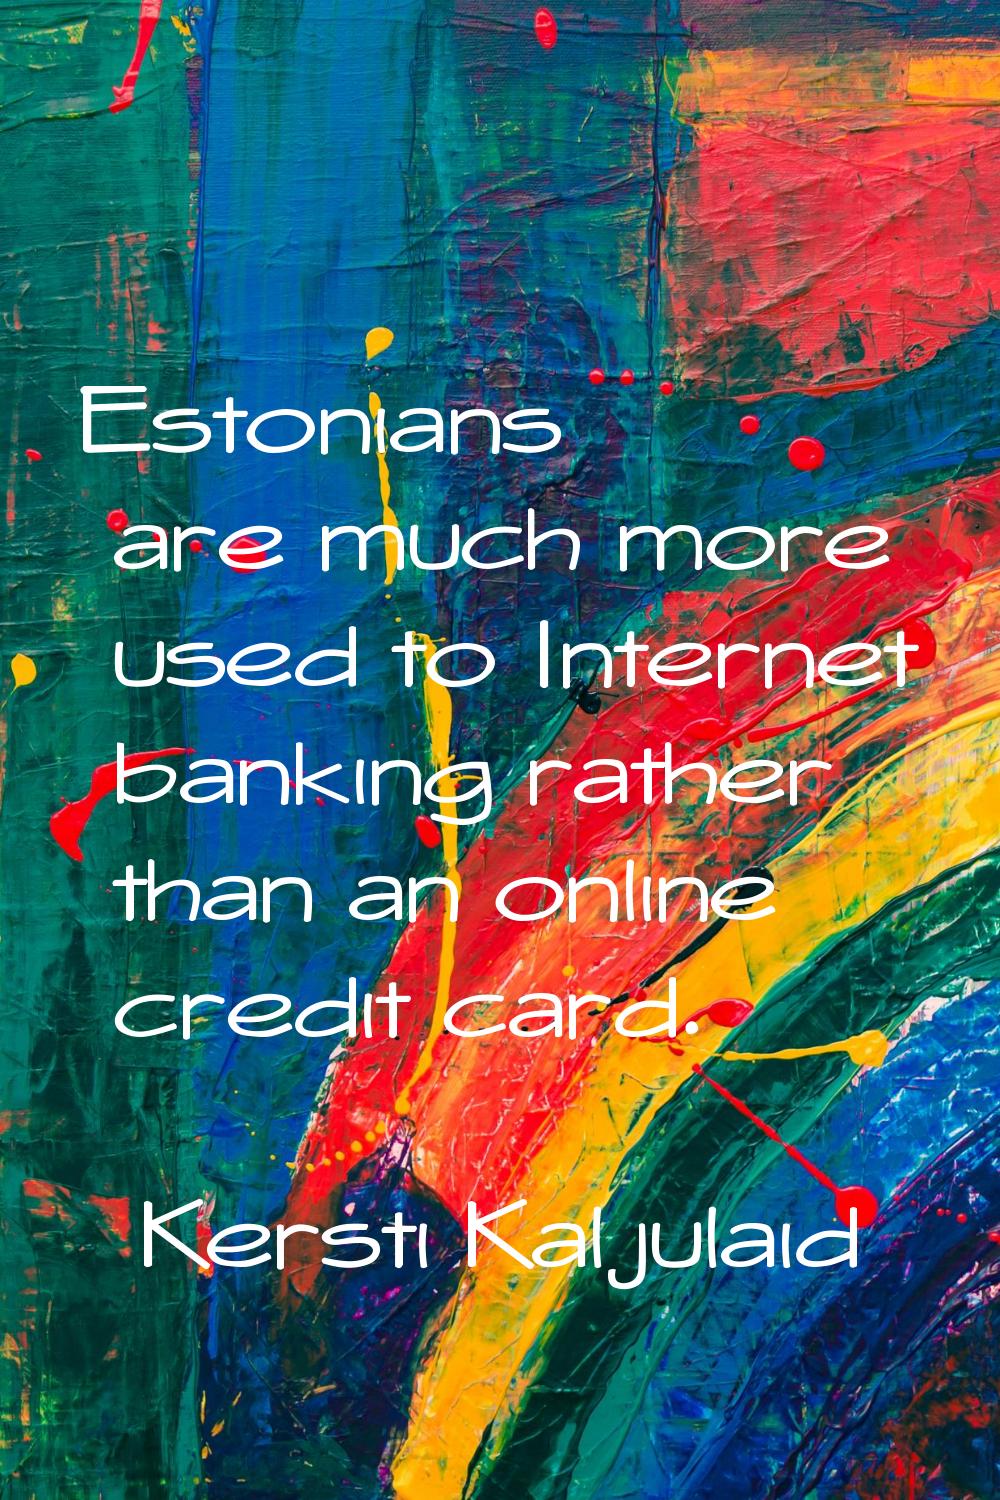 Estonians are much more used to Internet banking rather than an online credit card.